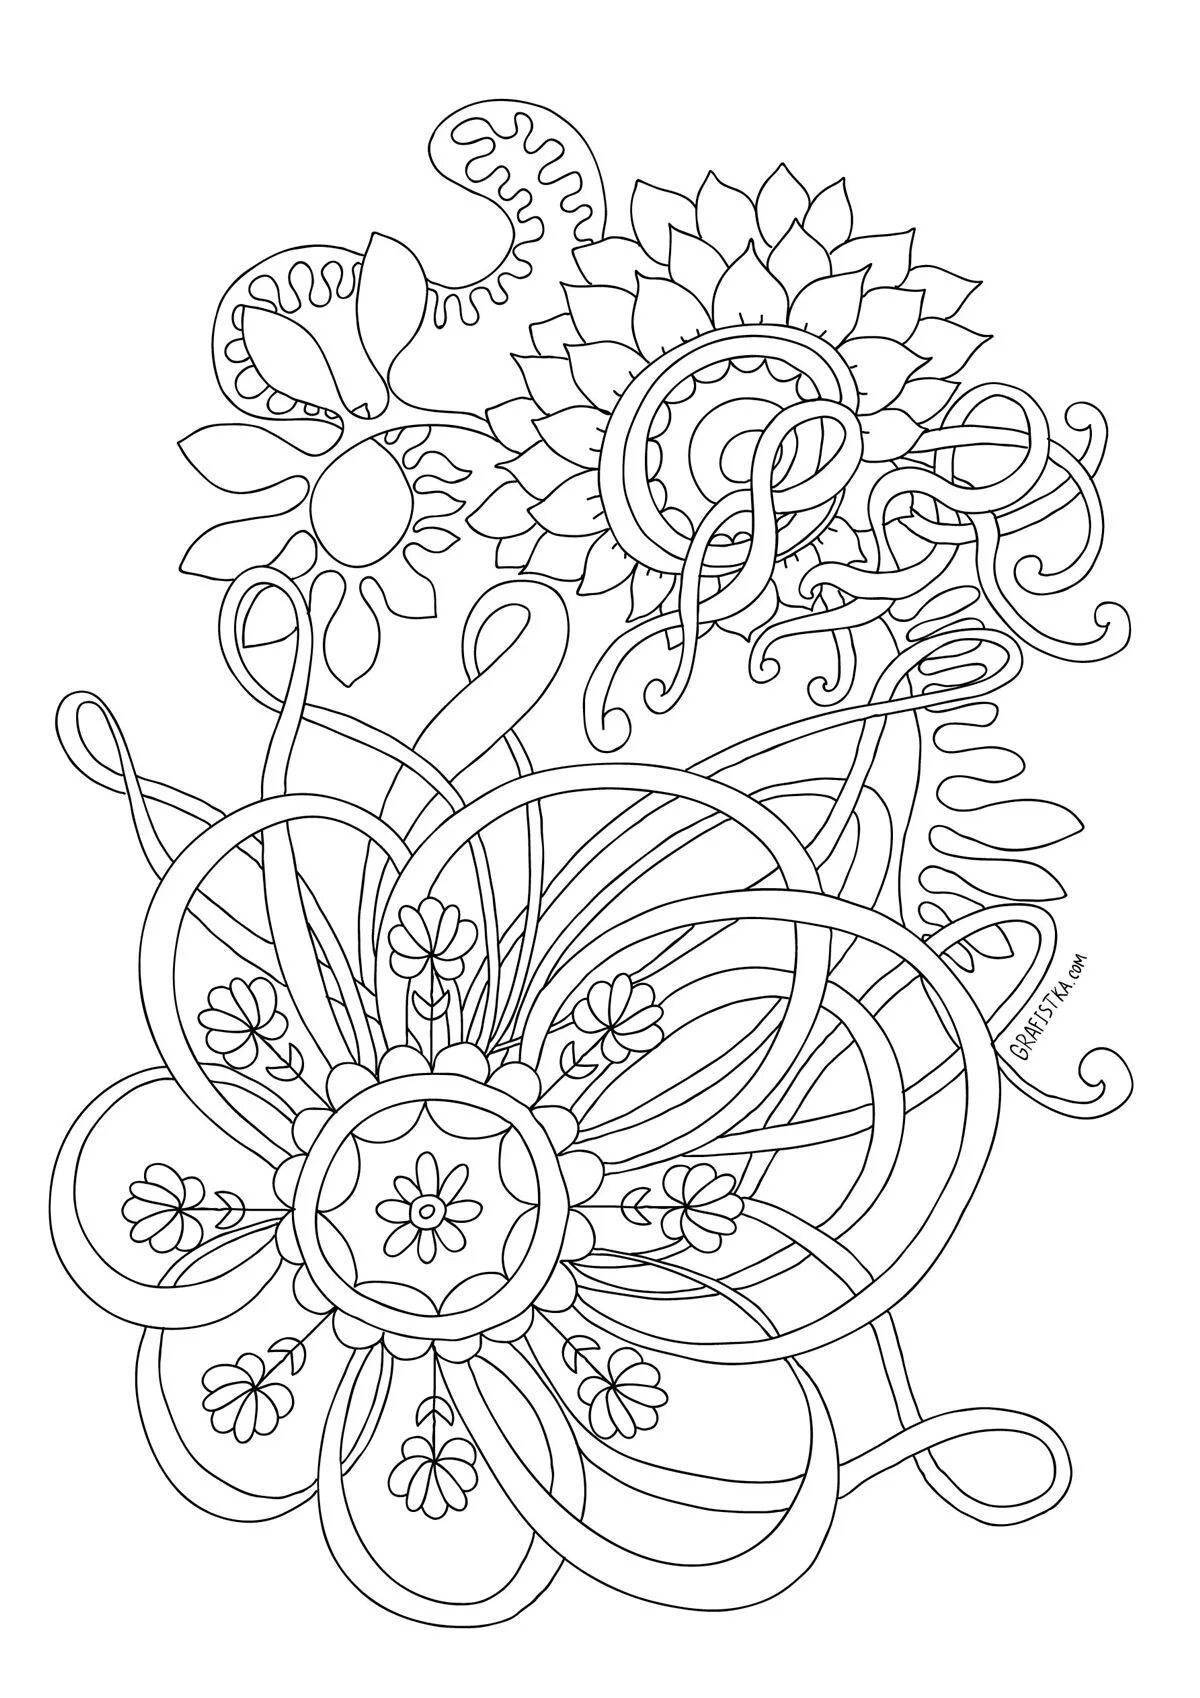 Intriguing patterned coloring book